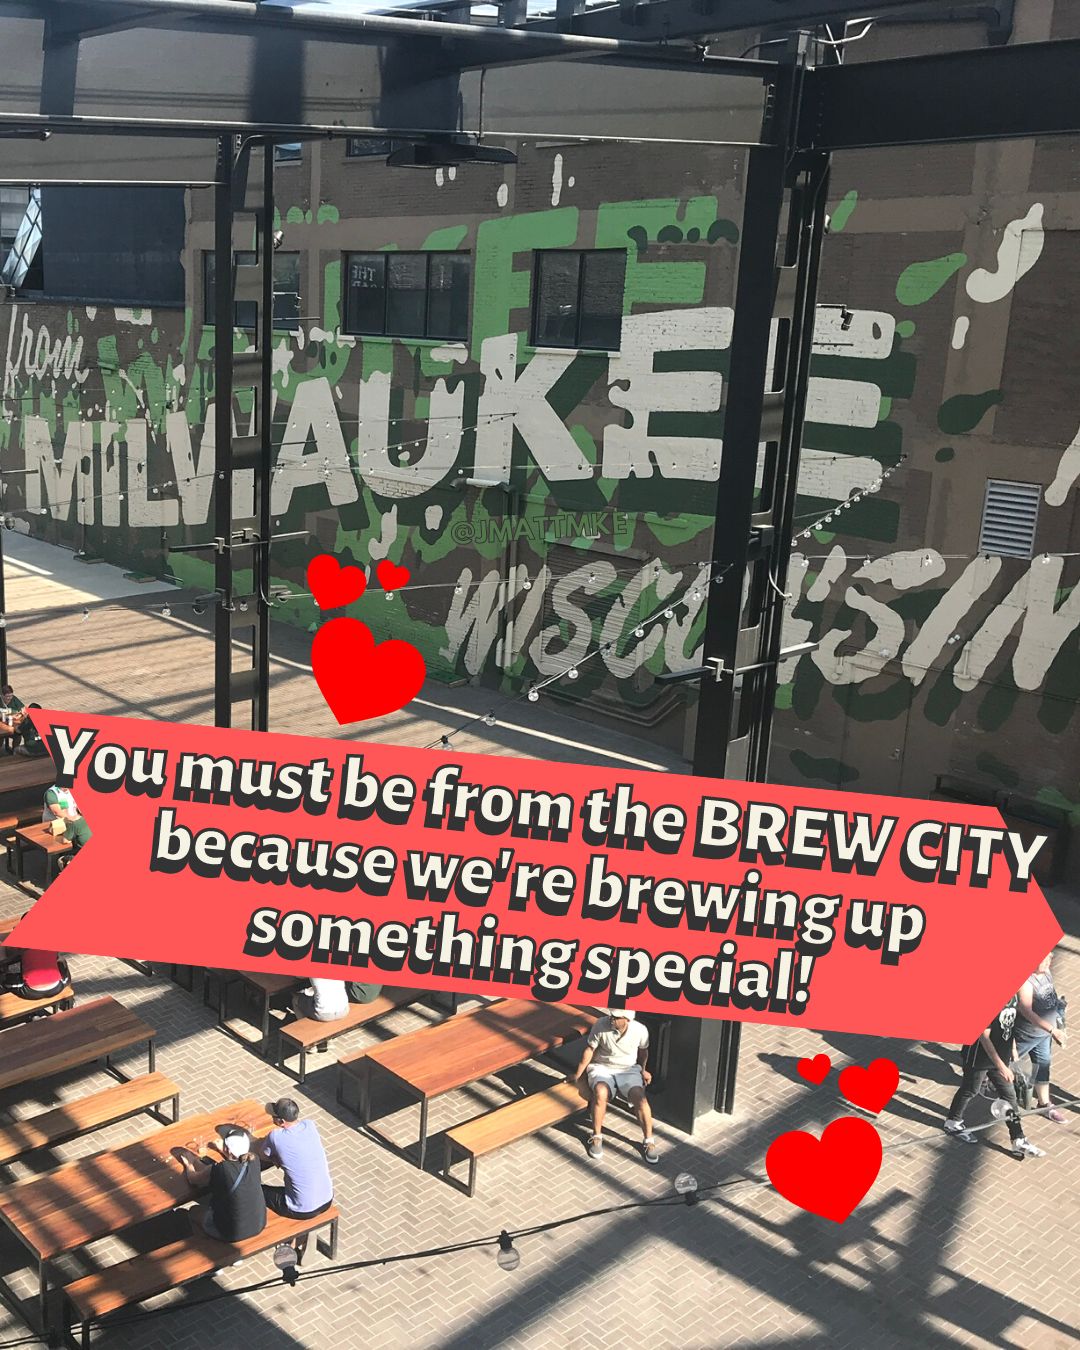 “You must be from the Brew City because we’re brewing up something special!”